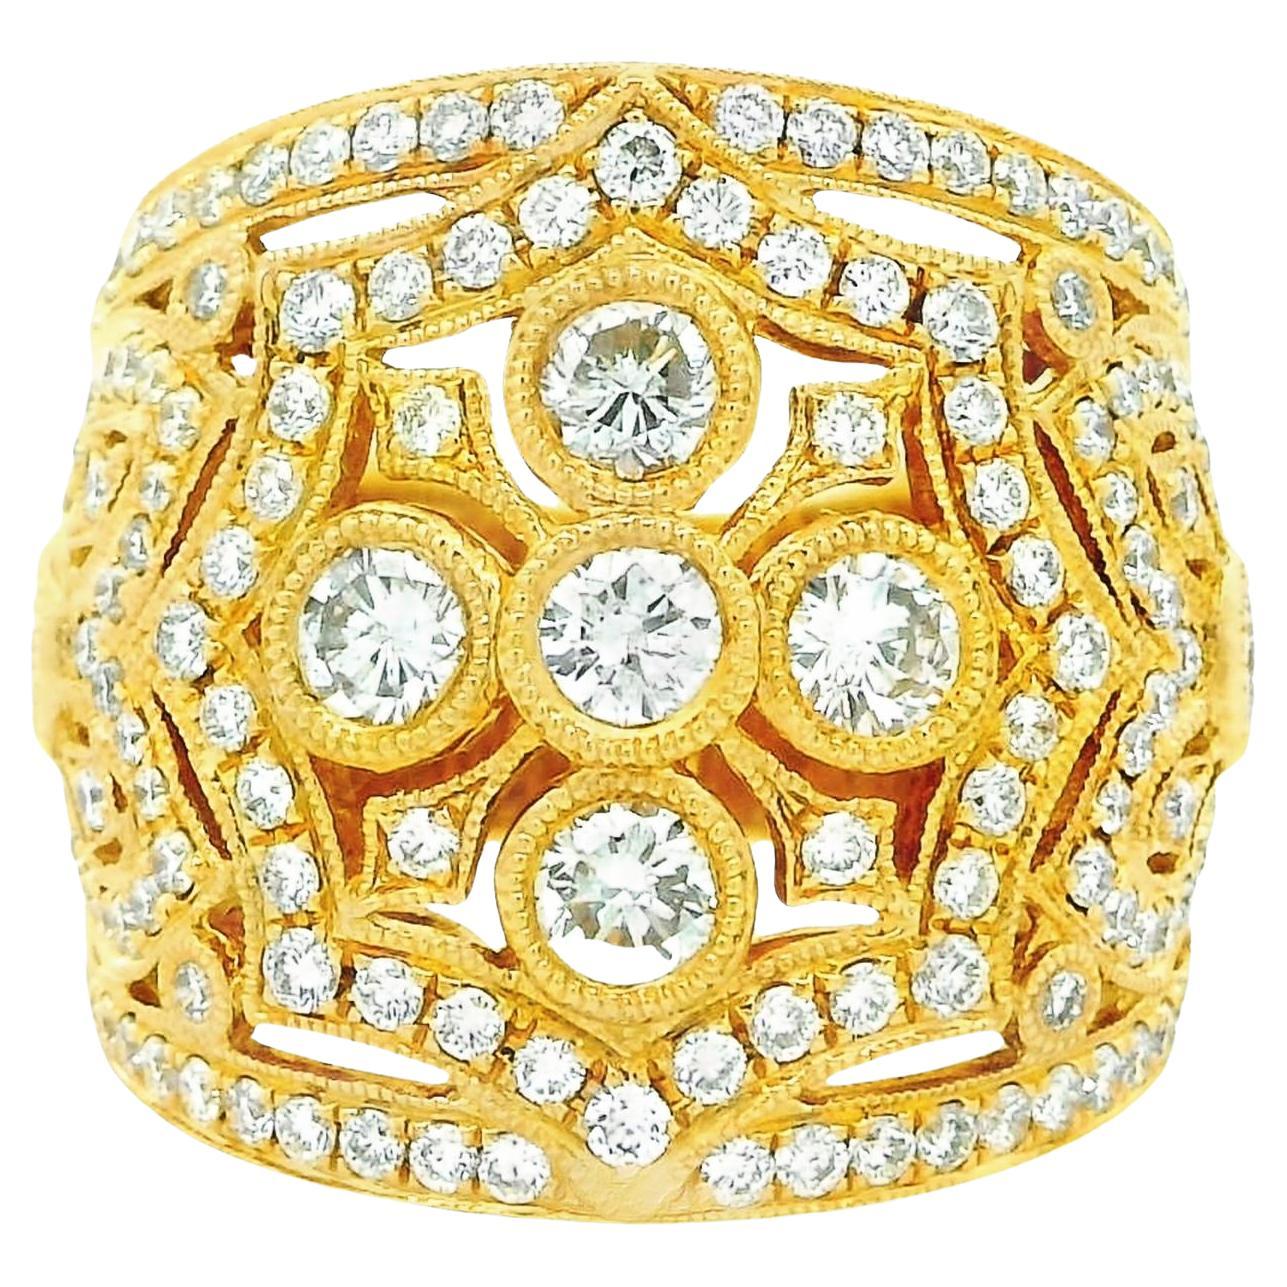 2.23 Carats Diamond Antique-Style 18K Yellow Gold Band Ring For Sale